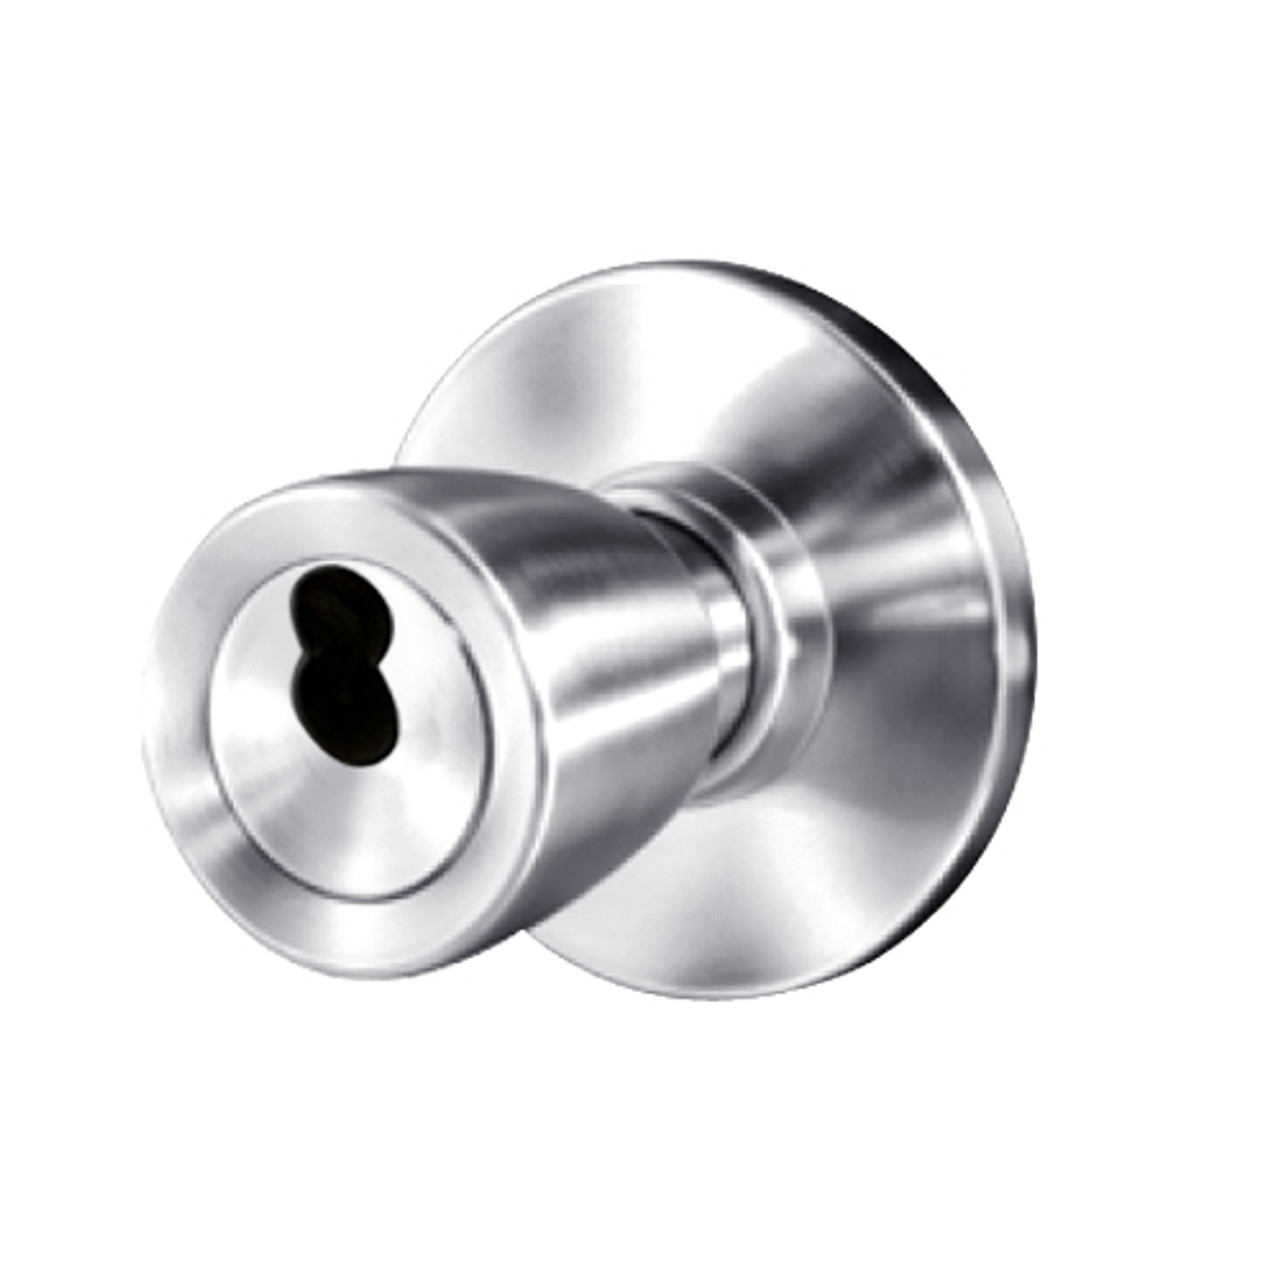 8K37XR6AS3625 Best 8K Series Special Heavy Duty Cylindrical Knob Locks with Tulip Style in Bright Chrome